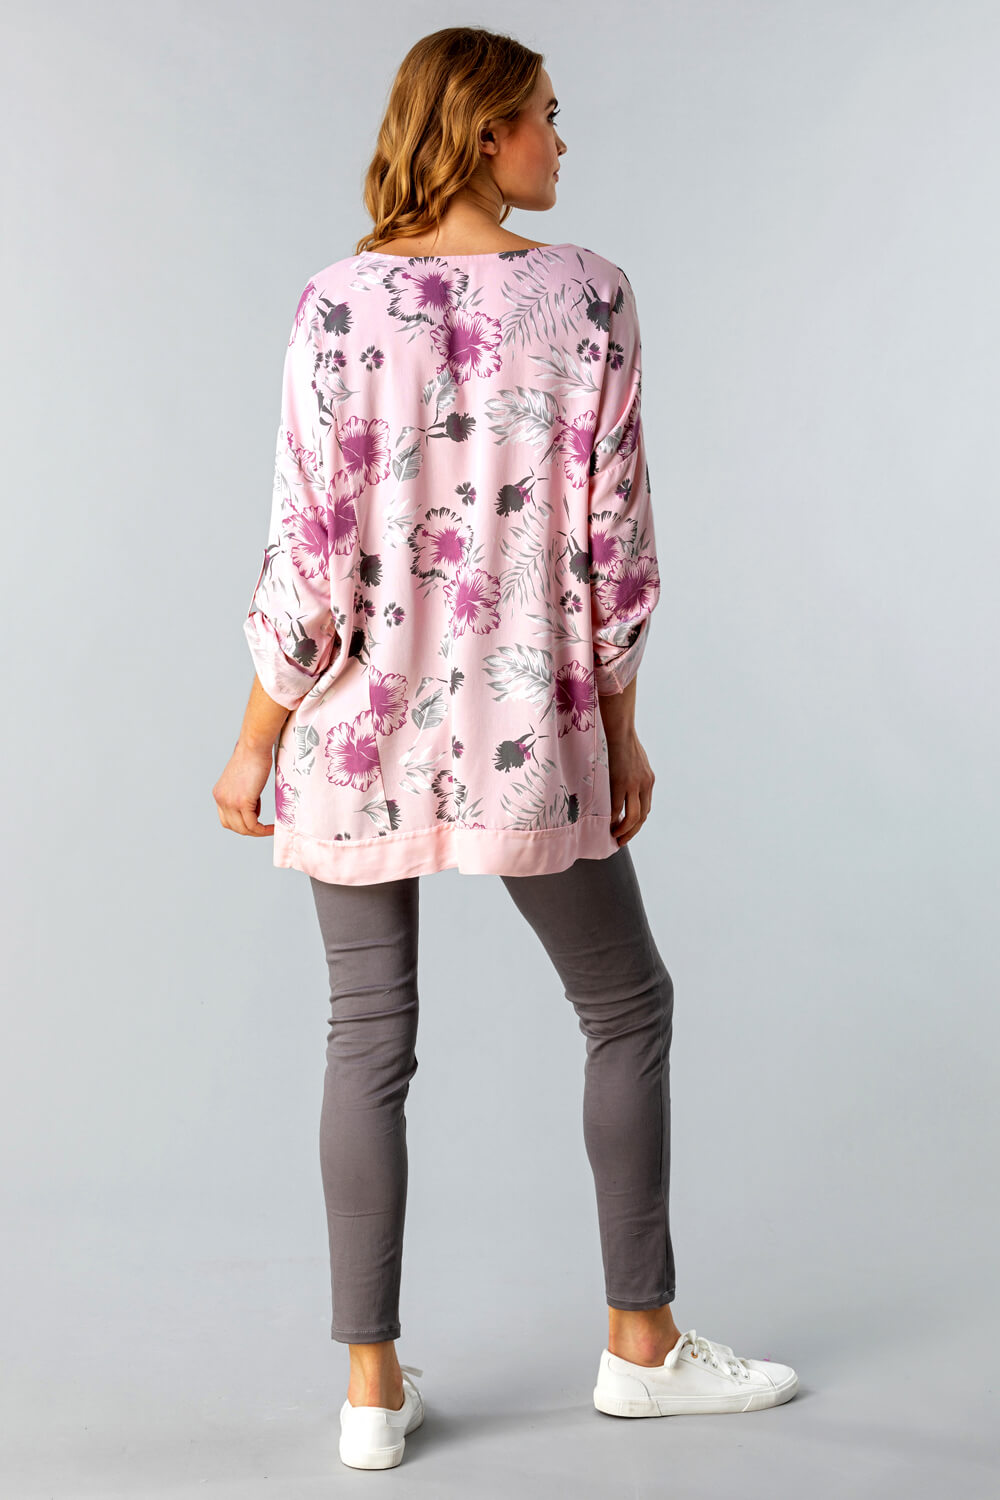 PINK Floral Print Longline Tunic Top, Image 2 of 4